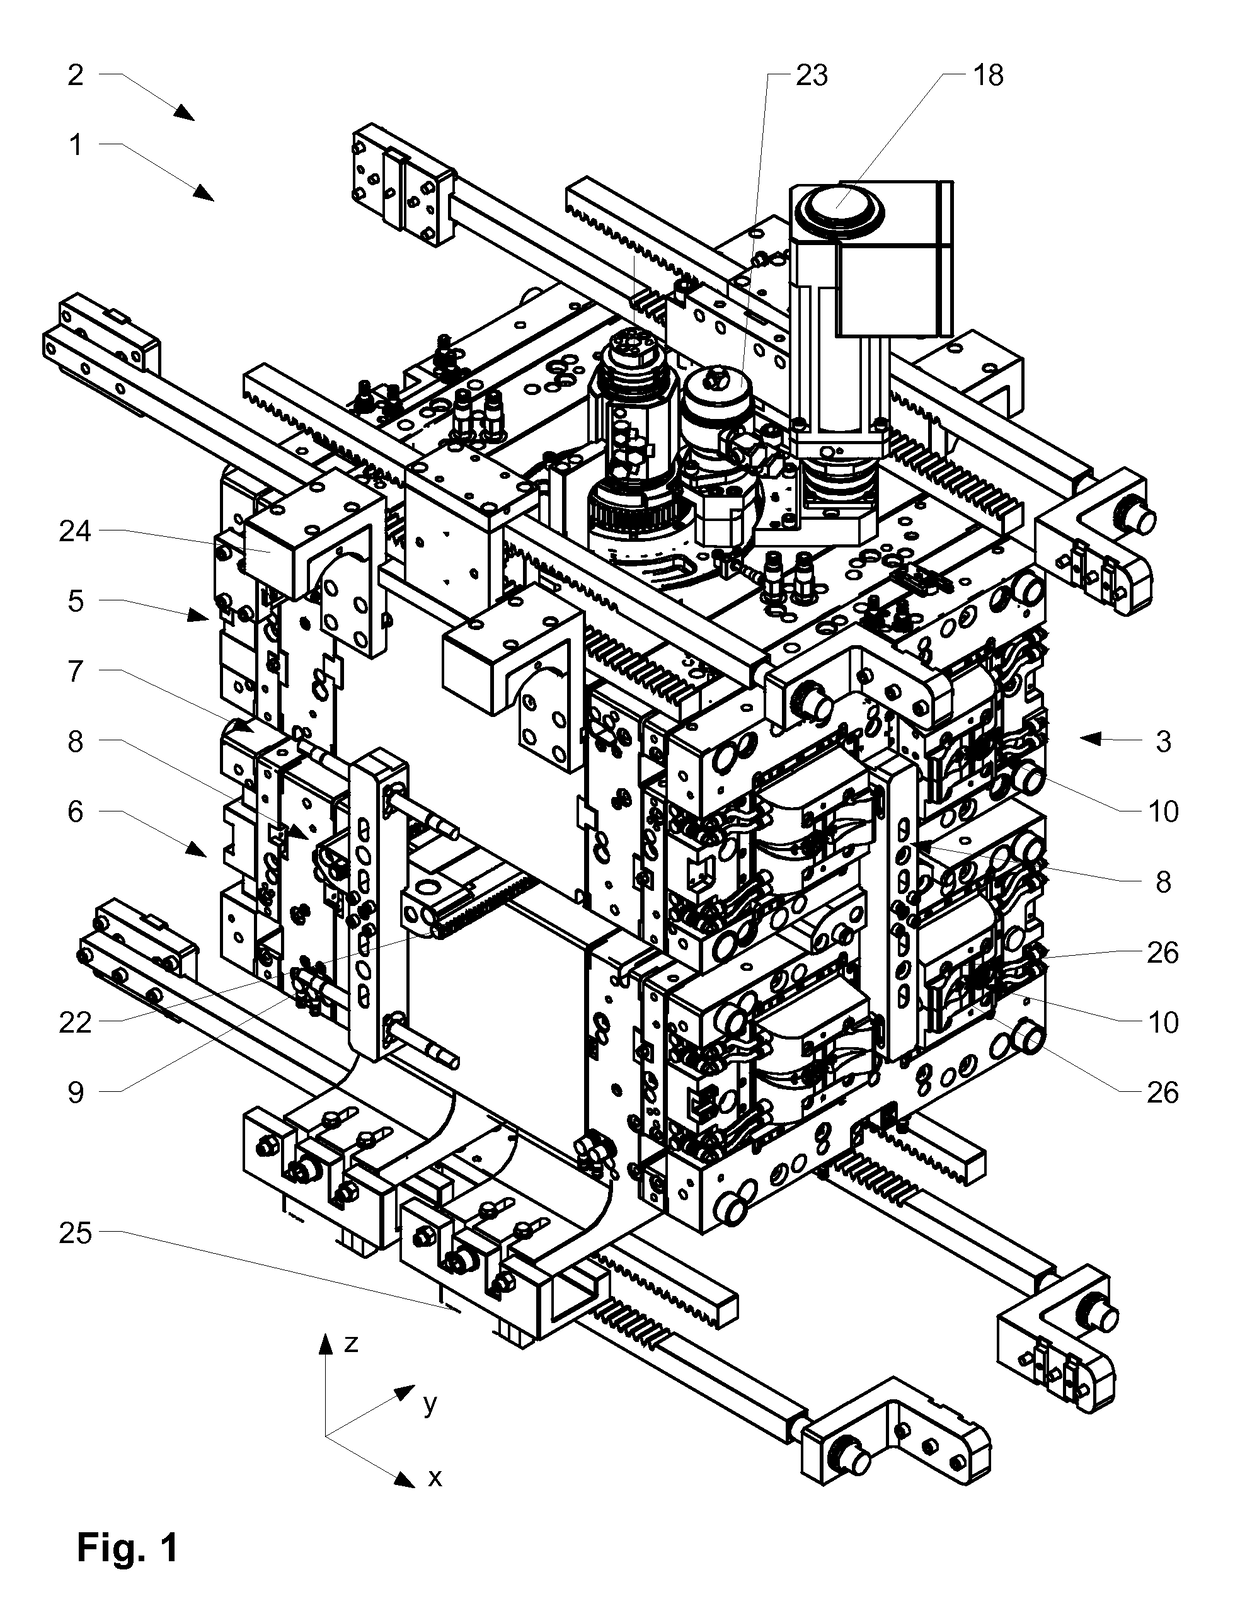 Injection moulding device